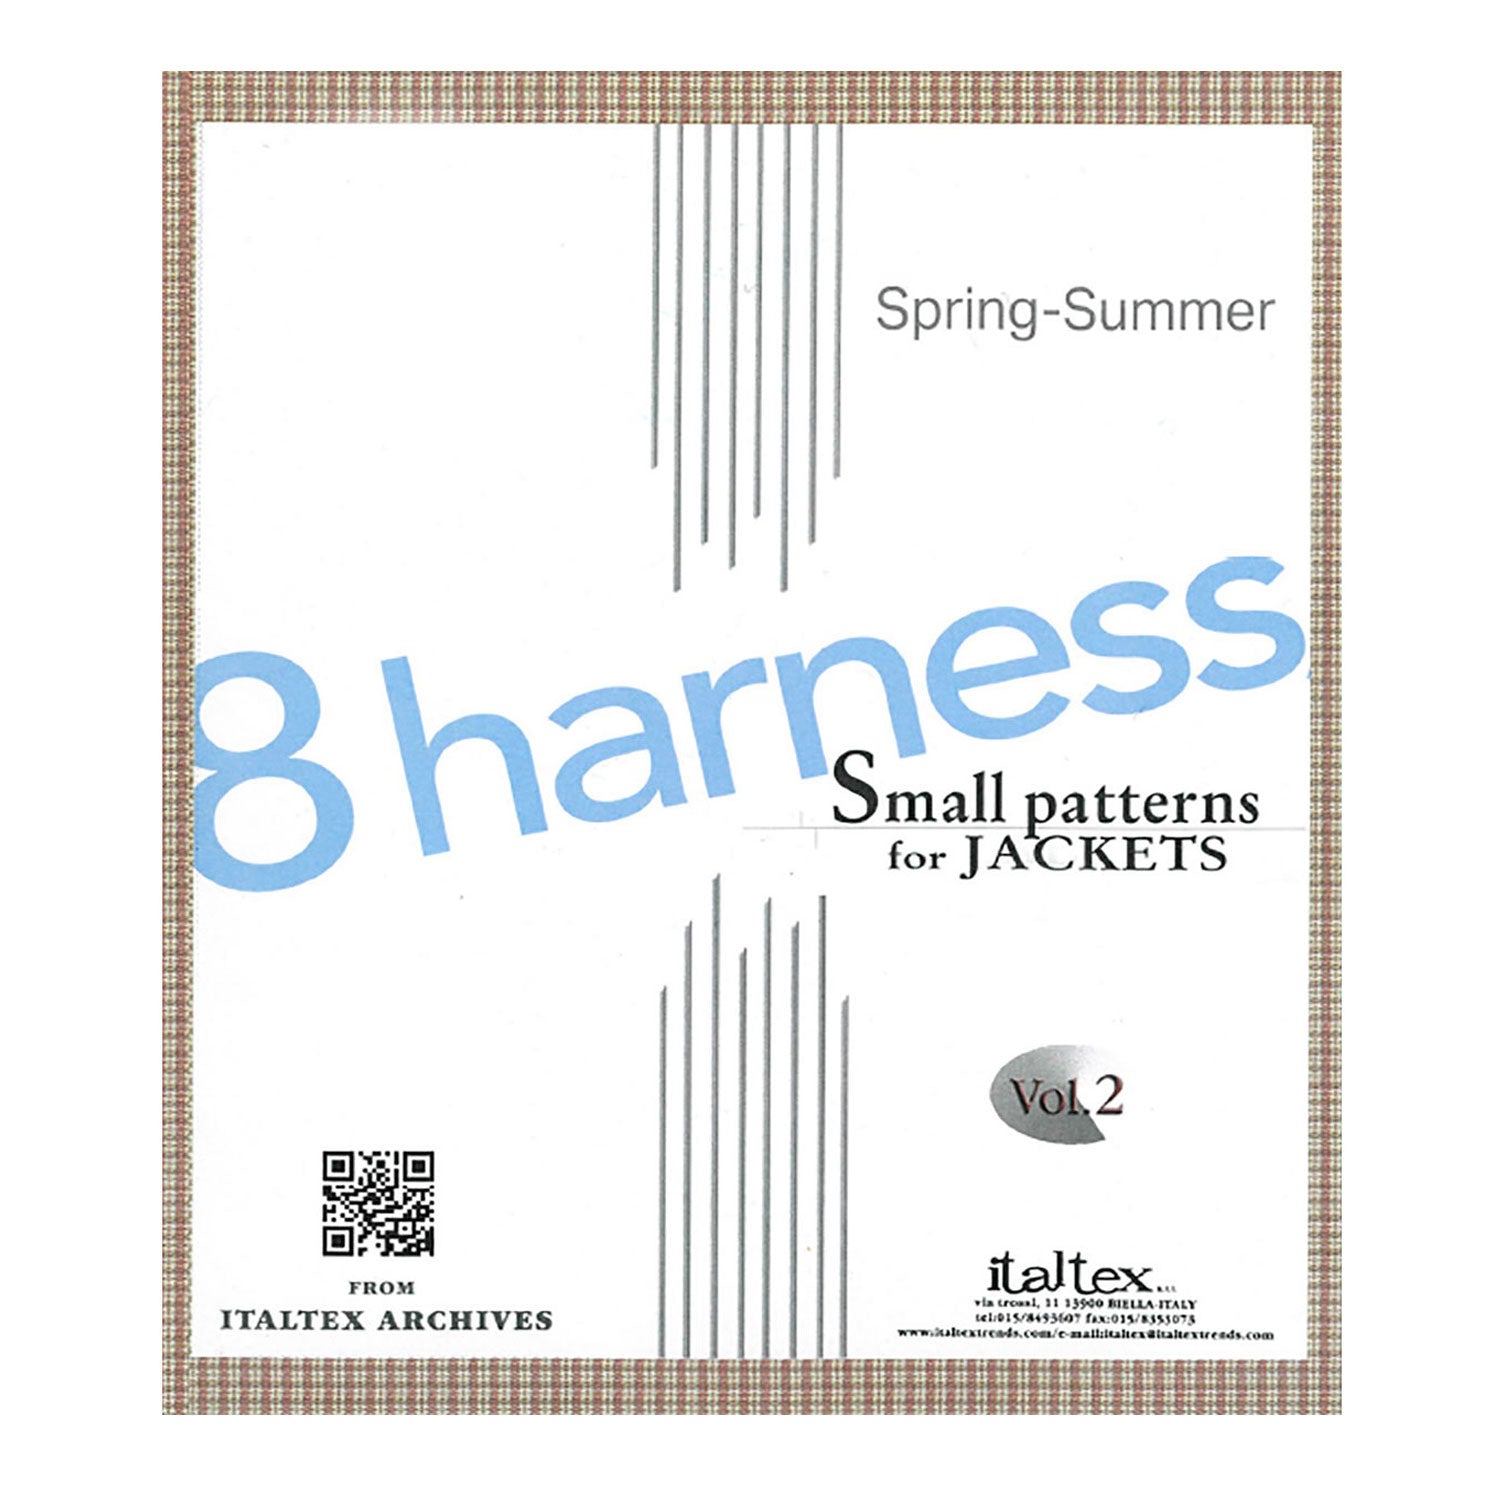 8 Harness Small Patterns for Jackets Vol. 2